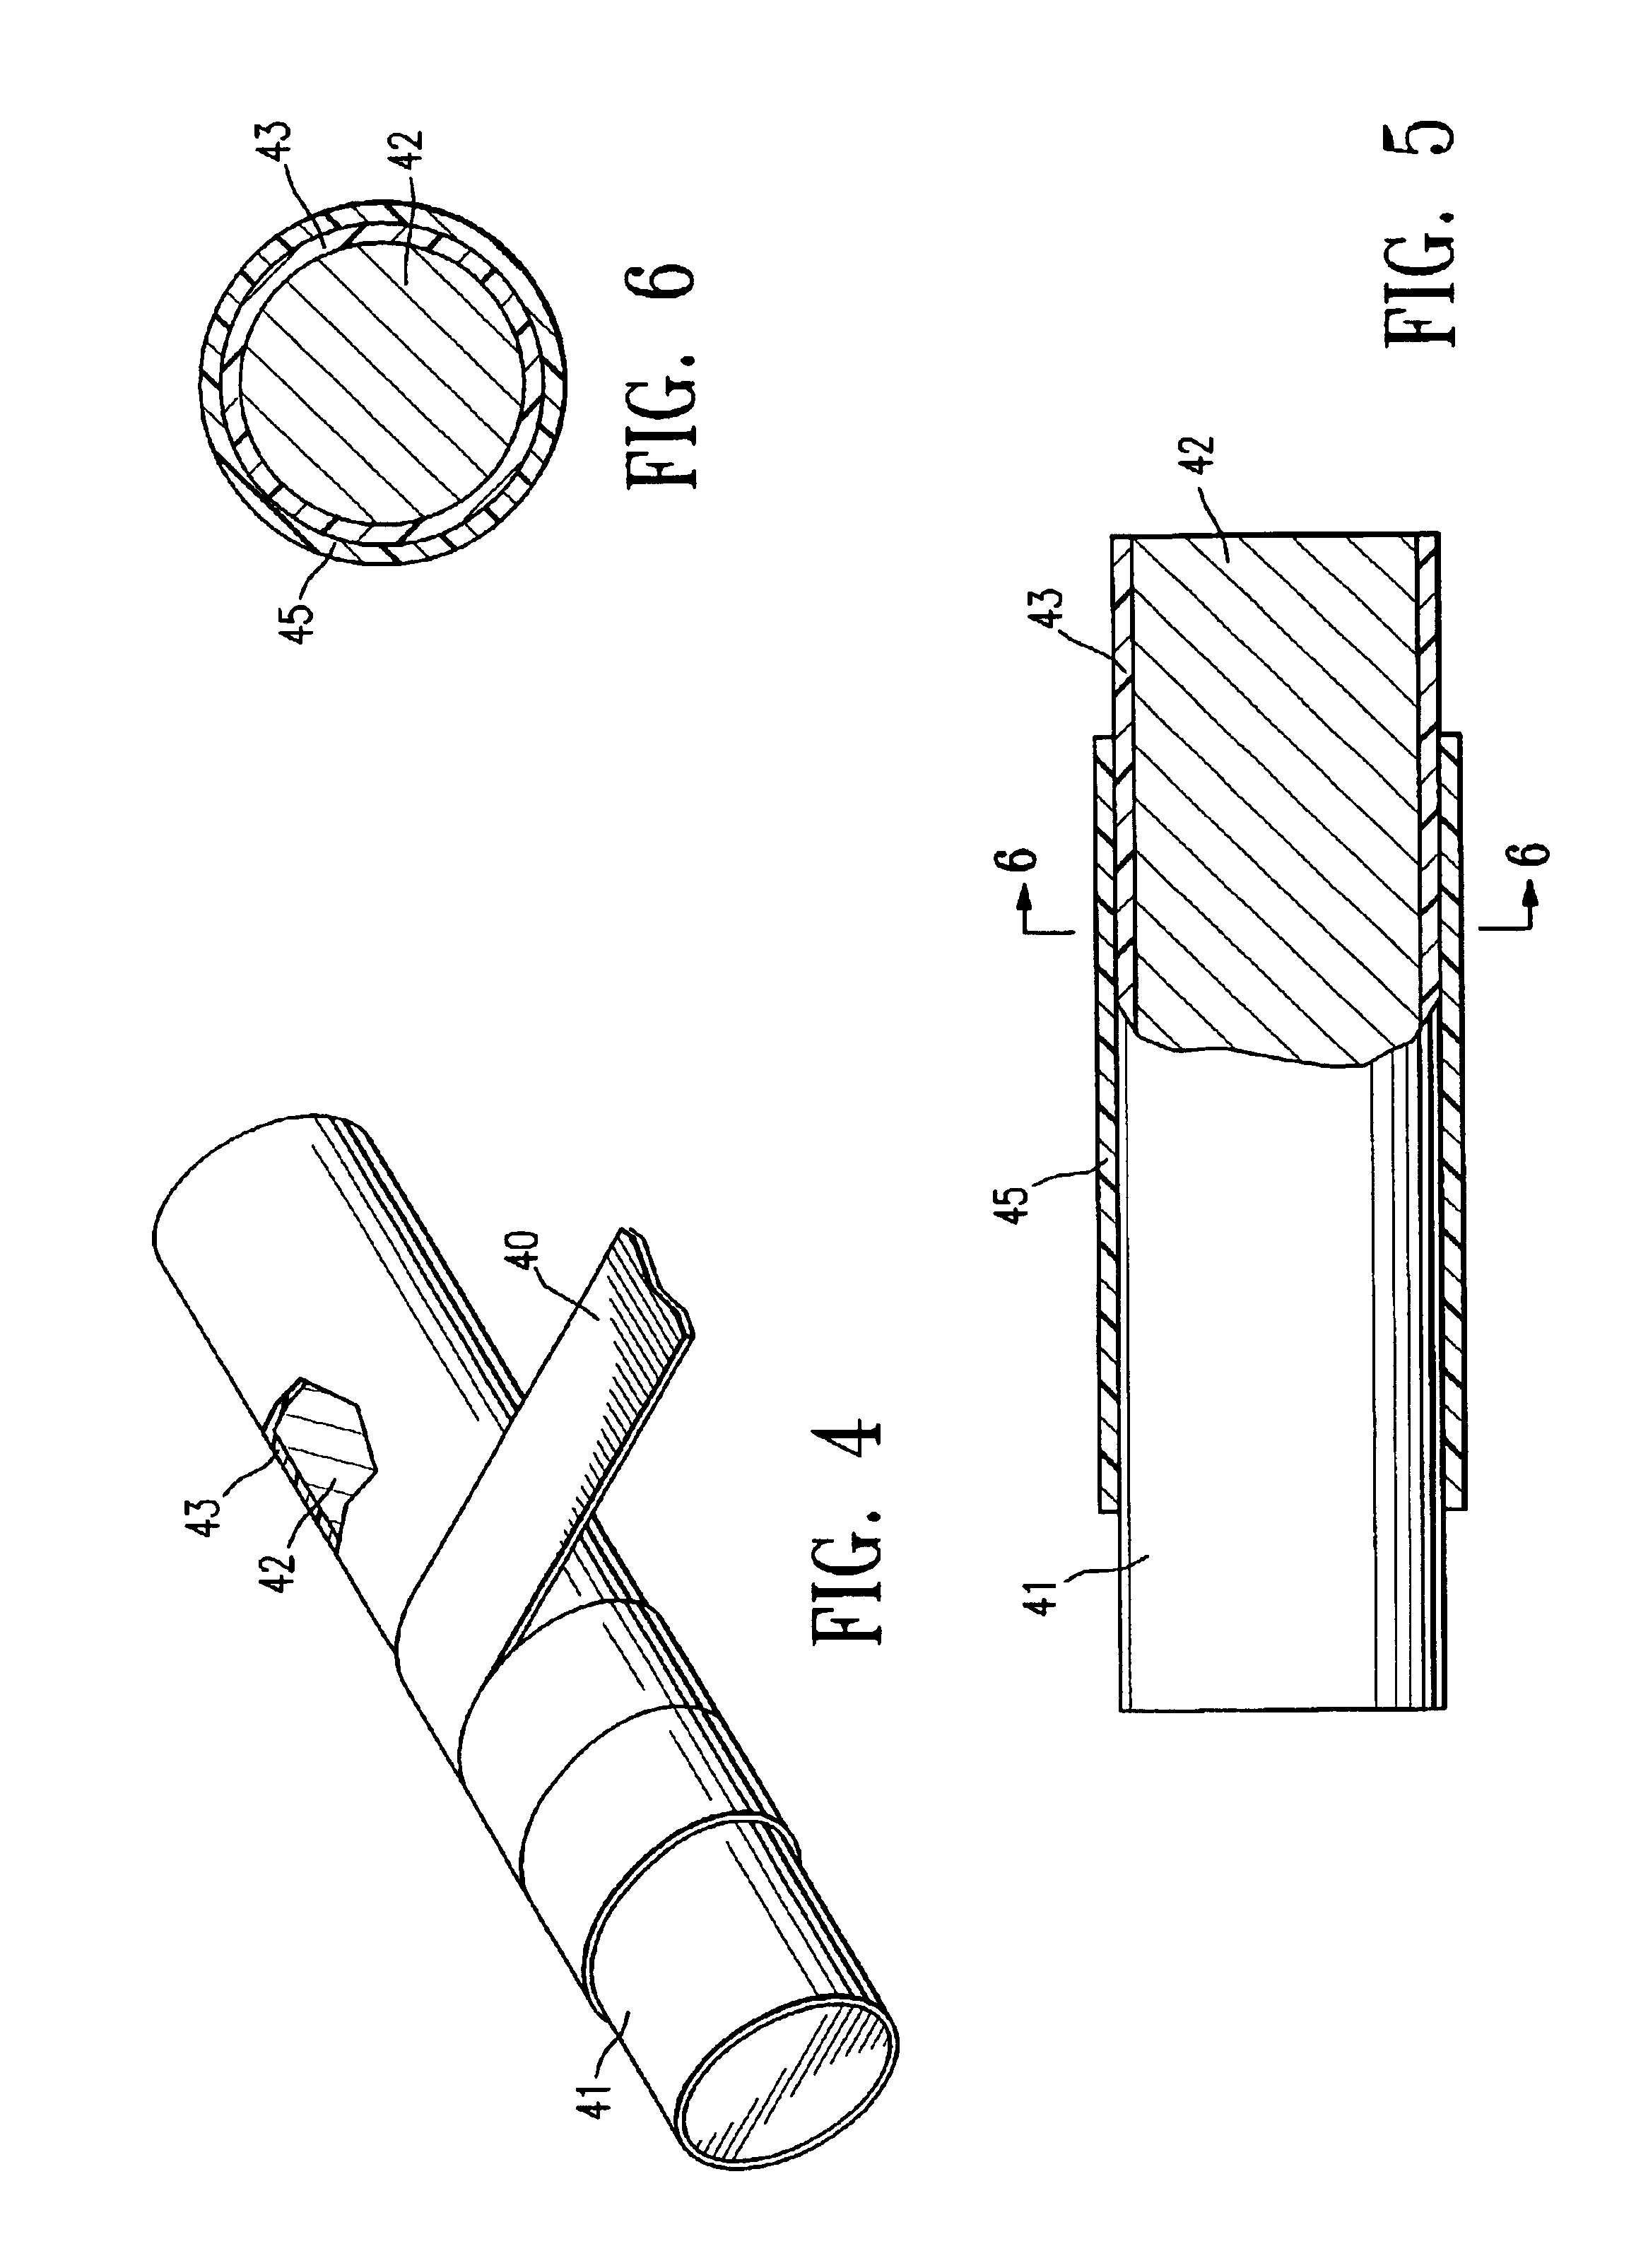 Method of making a catheter balloon using a polyimide covered mandrel